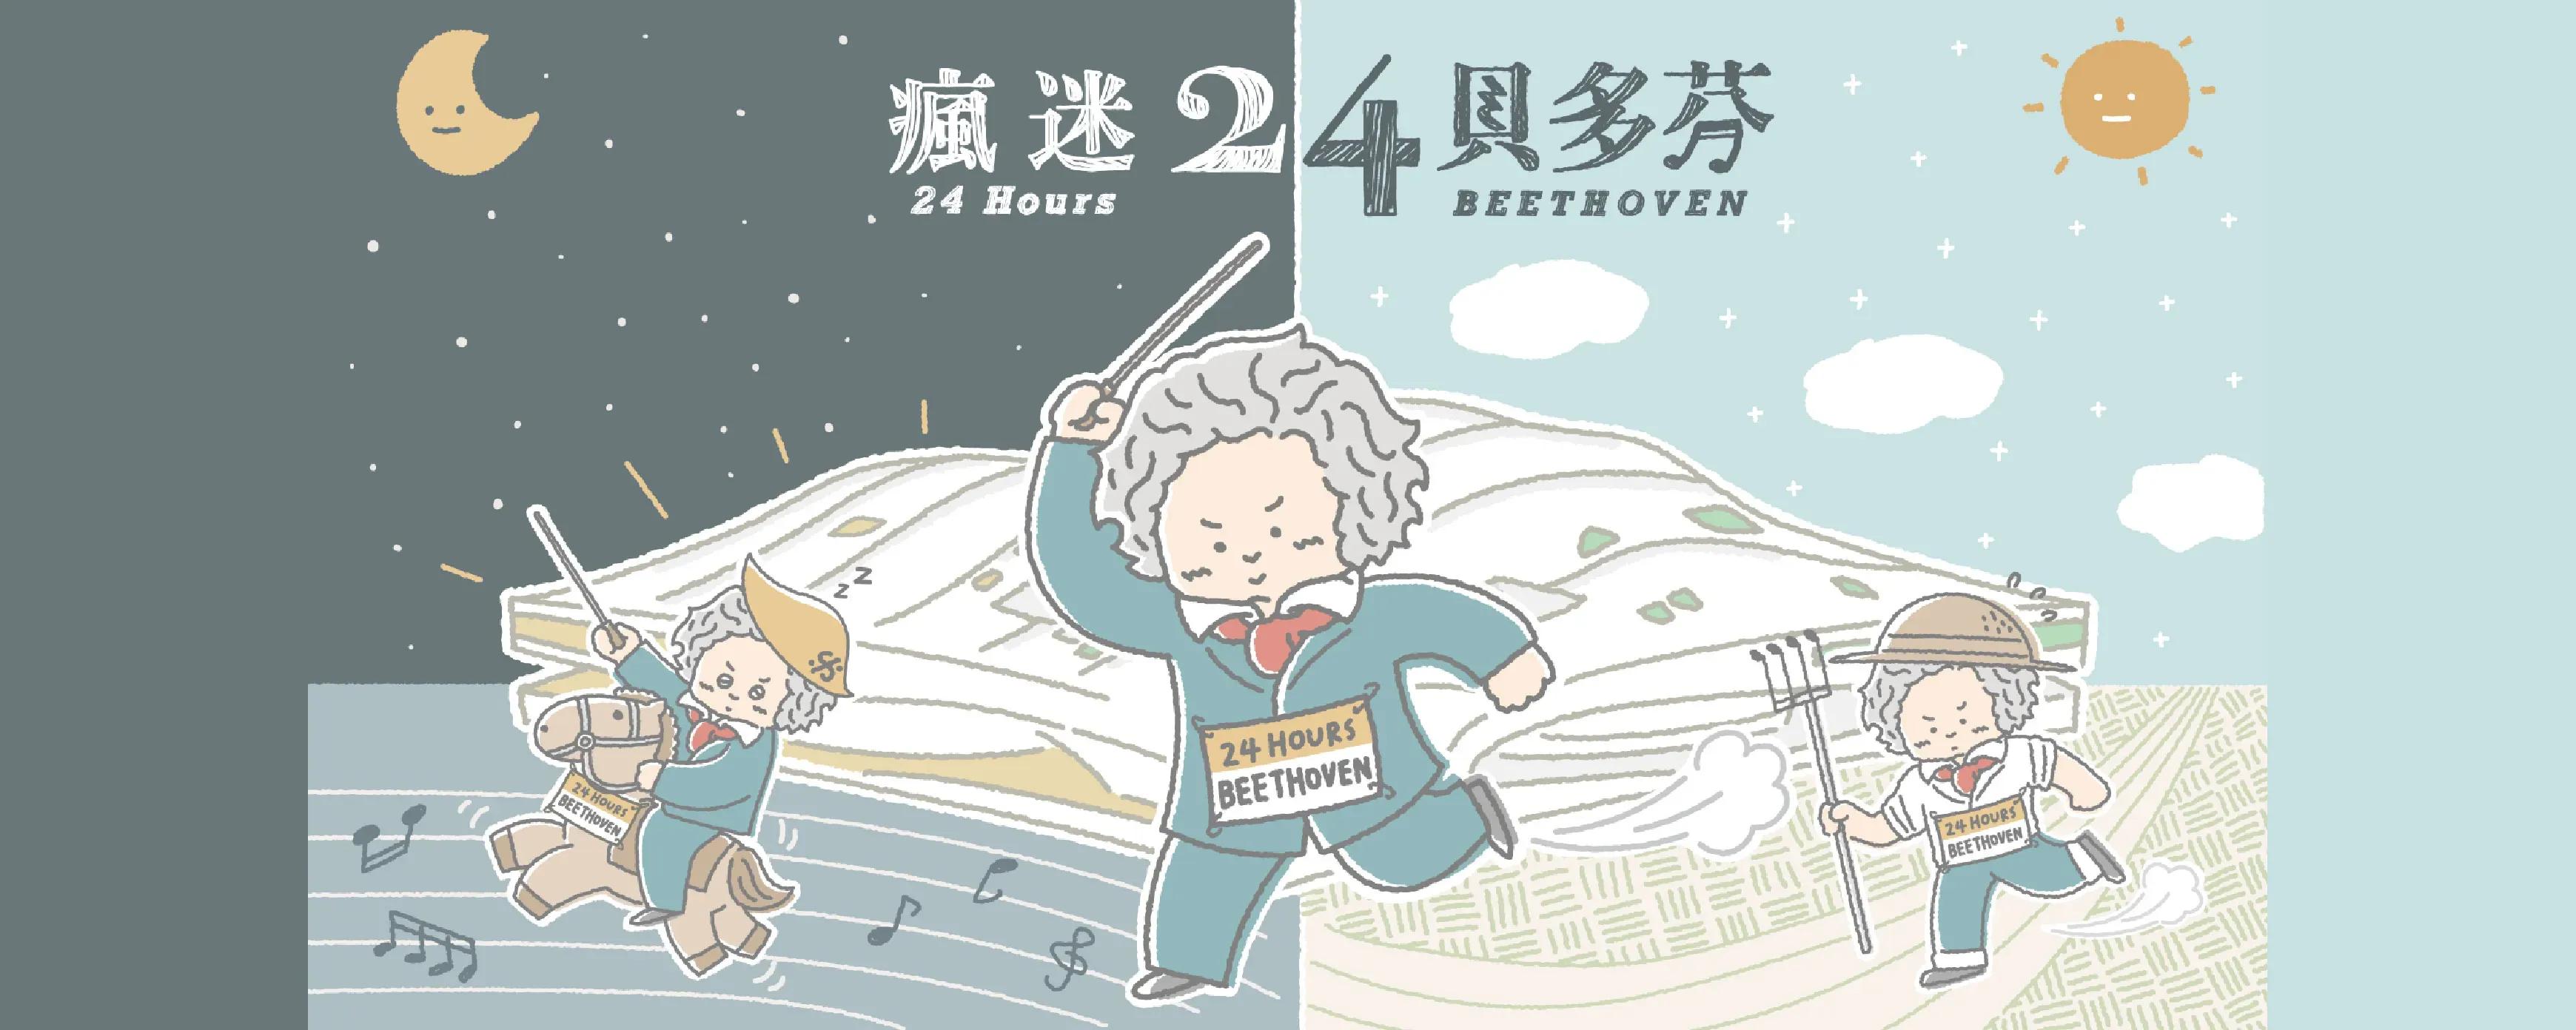 Classical Music Superstar: A Look at BEETHÖVEN, Illustrious Guest of the 24 Hours Series